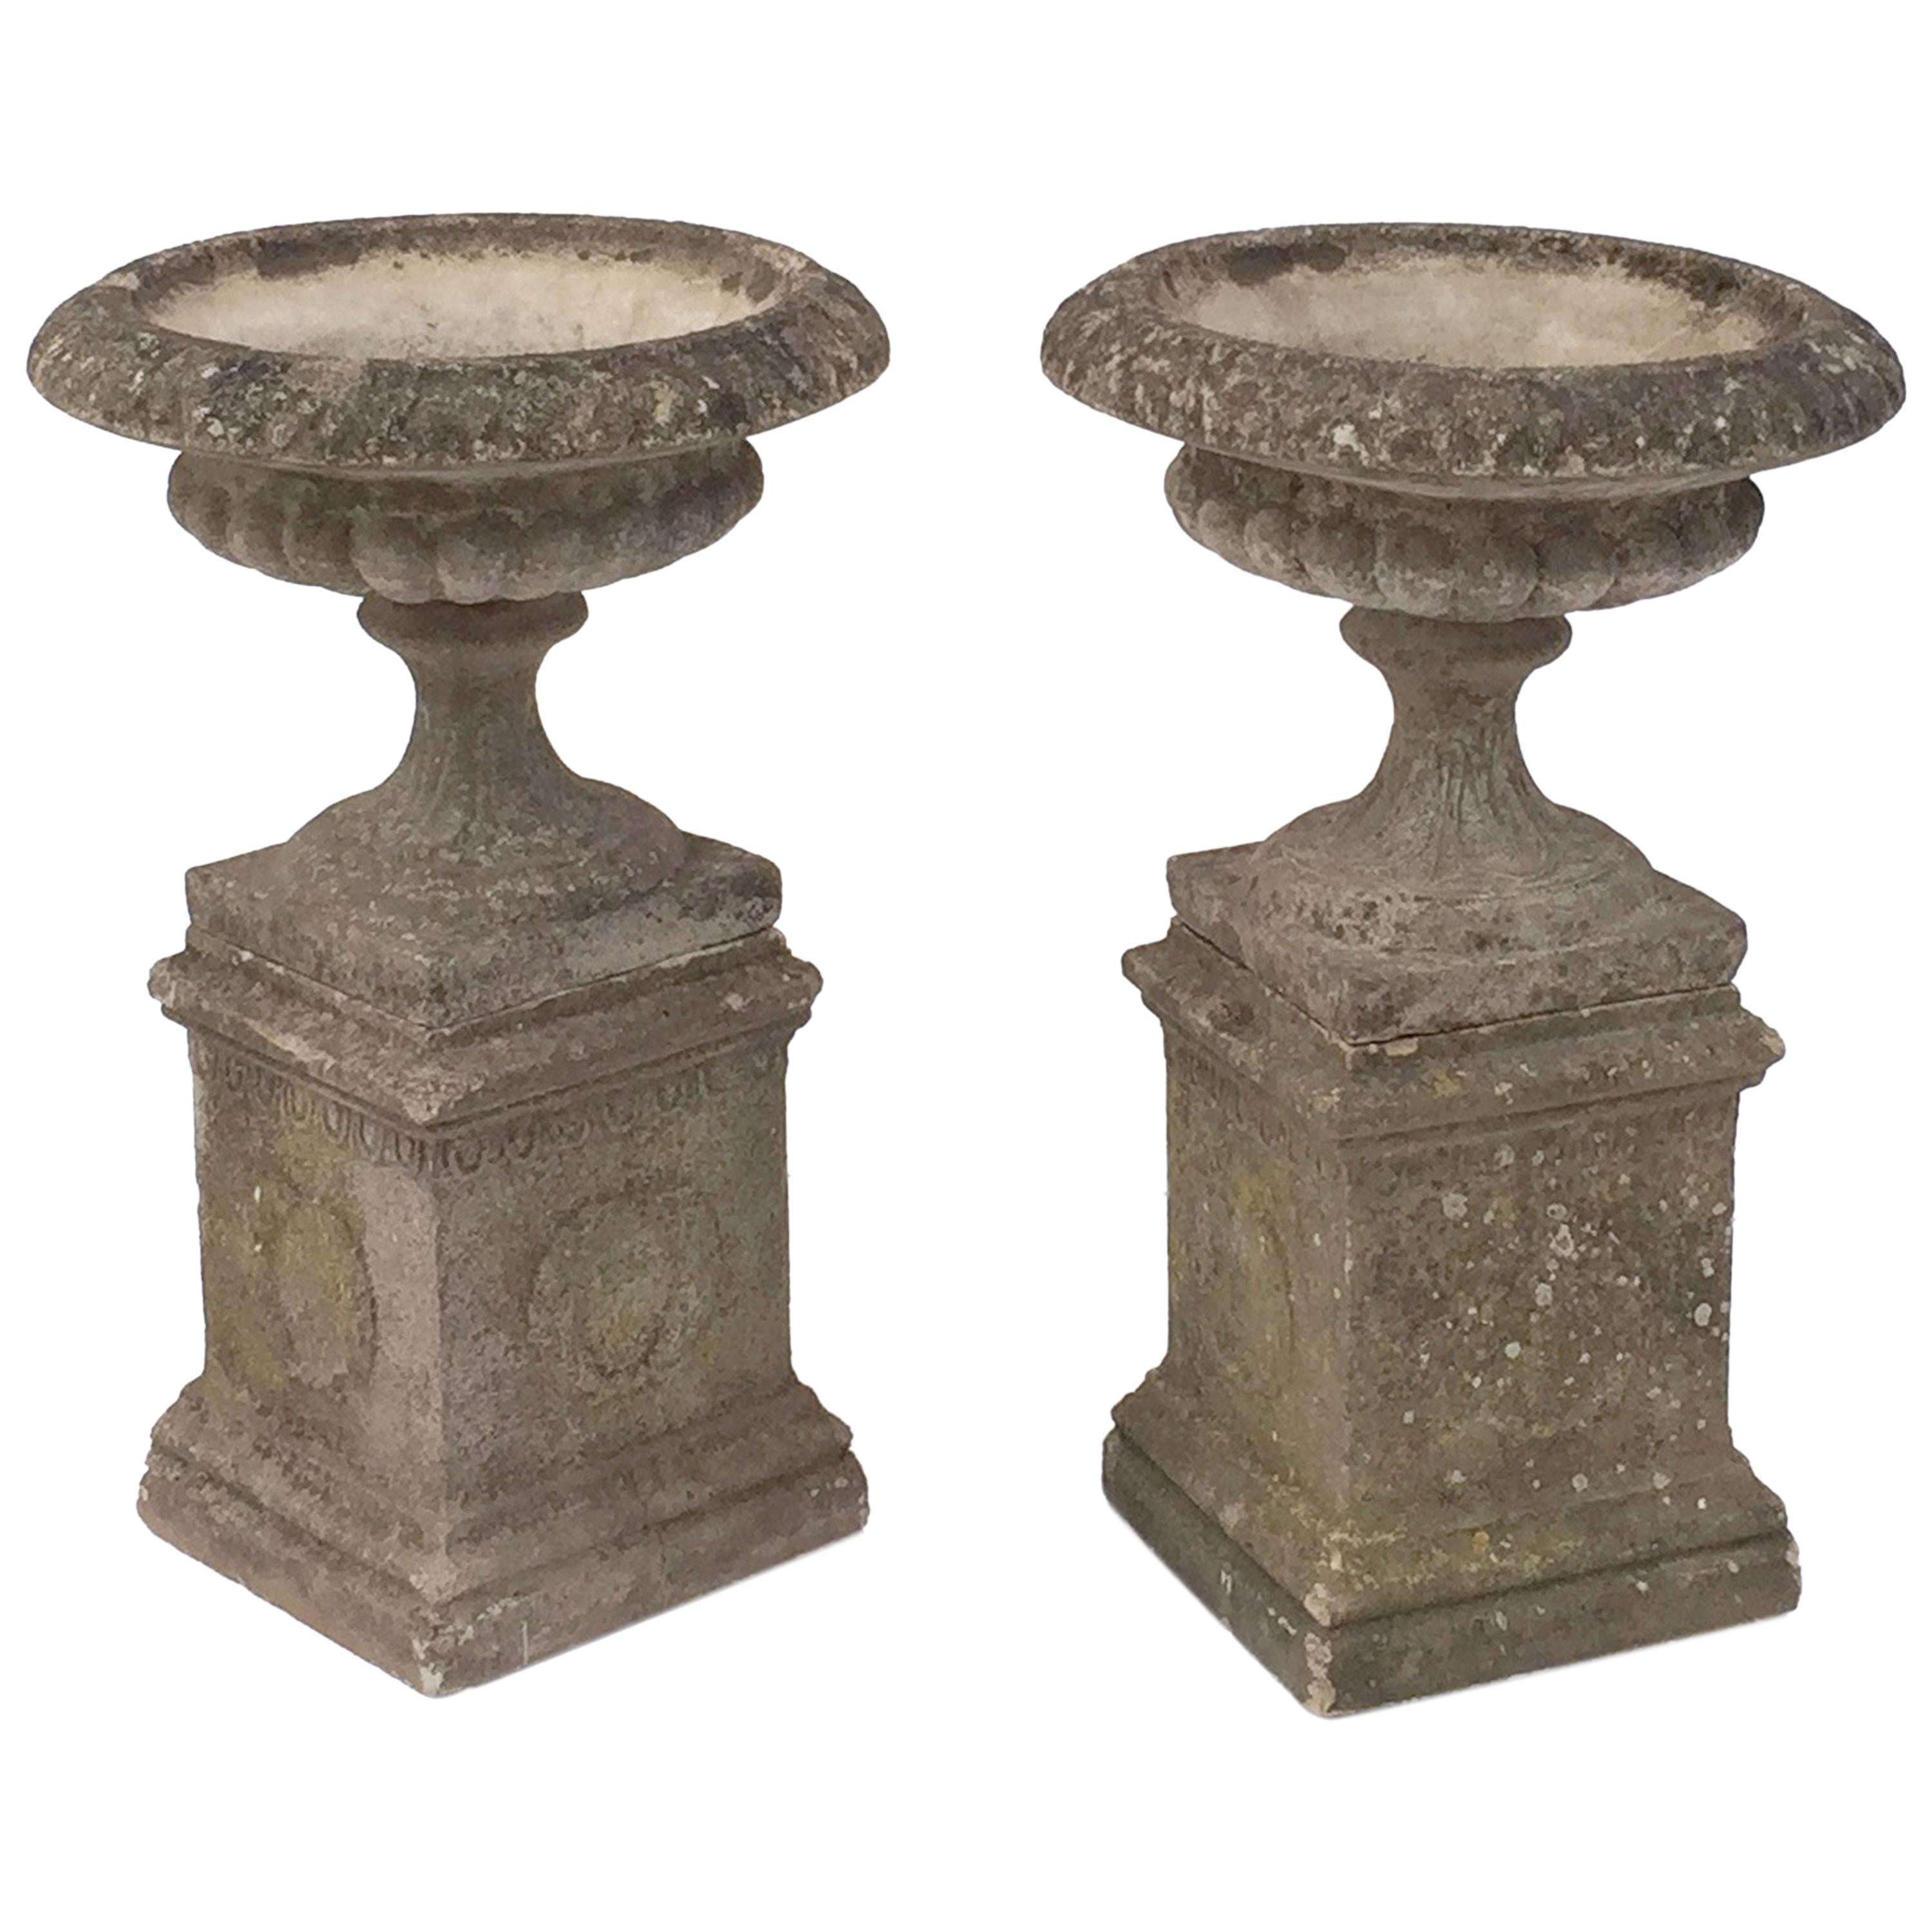 Pair of English Garden Stone Urns on Plinths with Garlands 'Individually Priced'